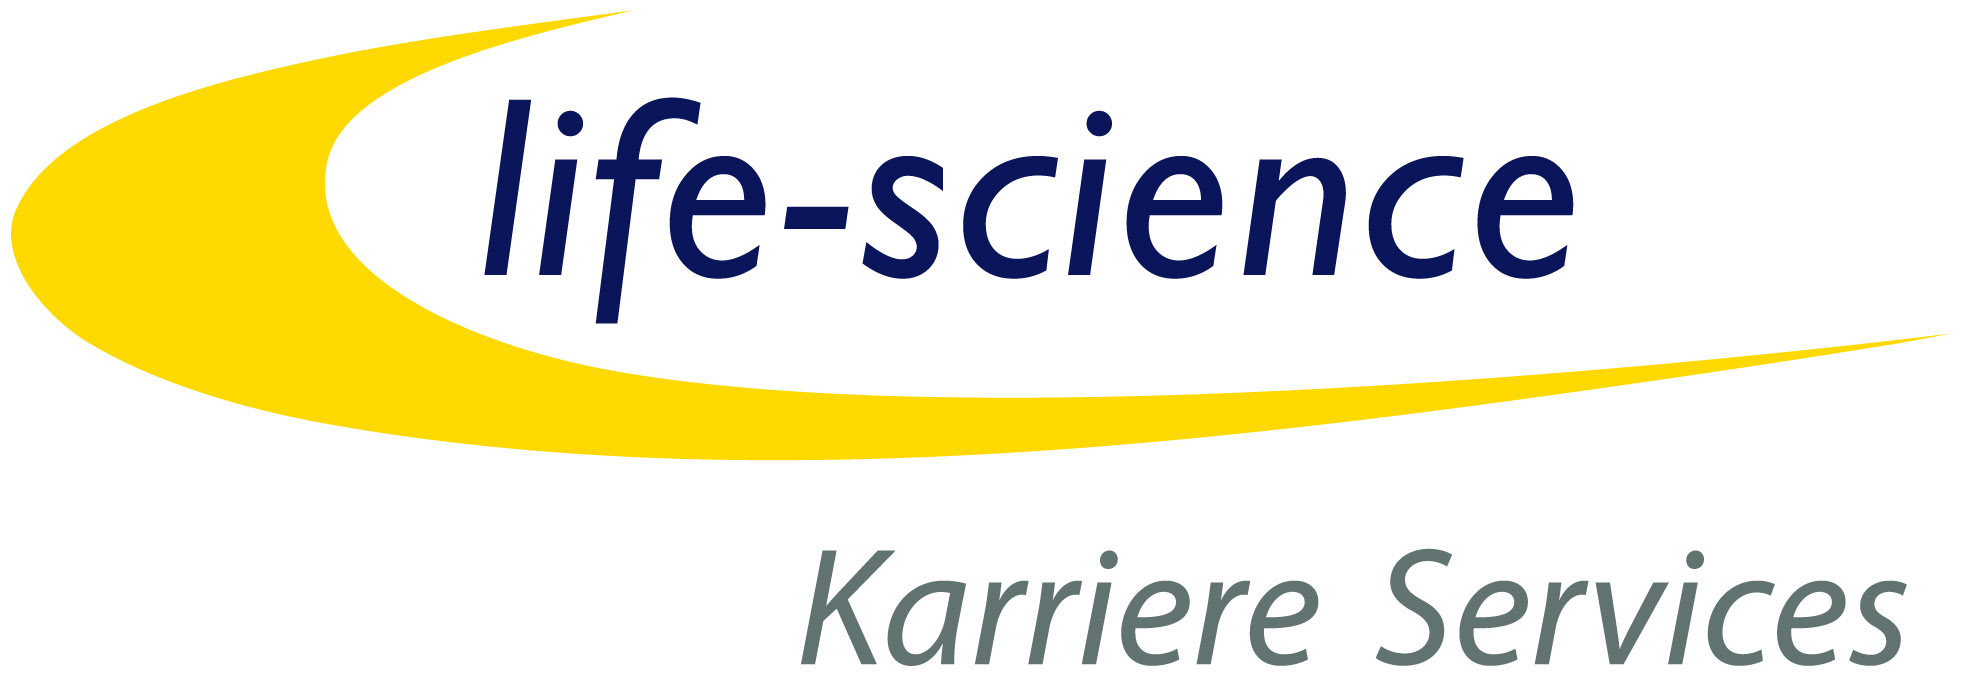 life-science Karriere Services